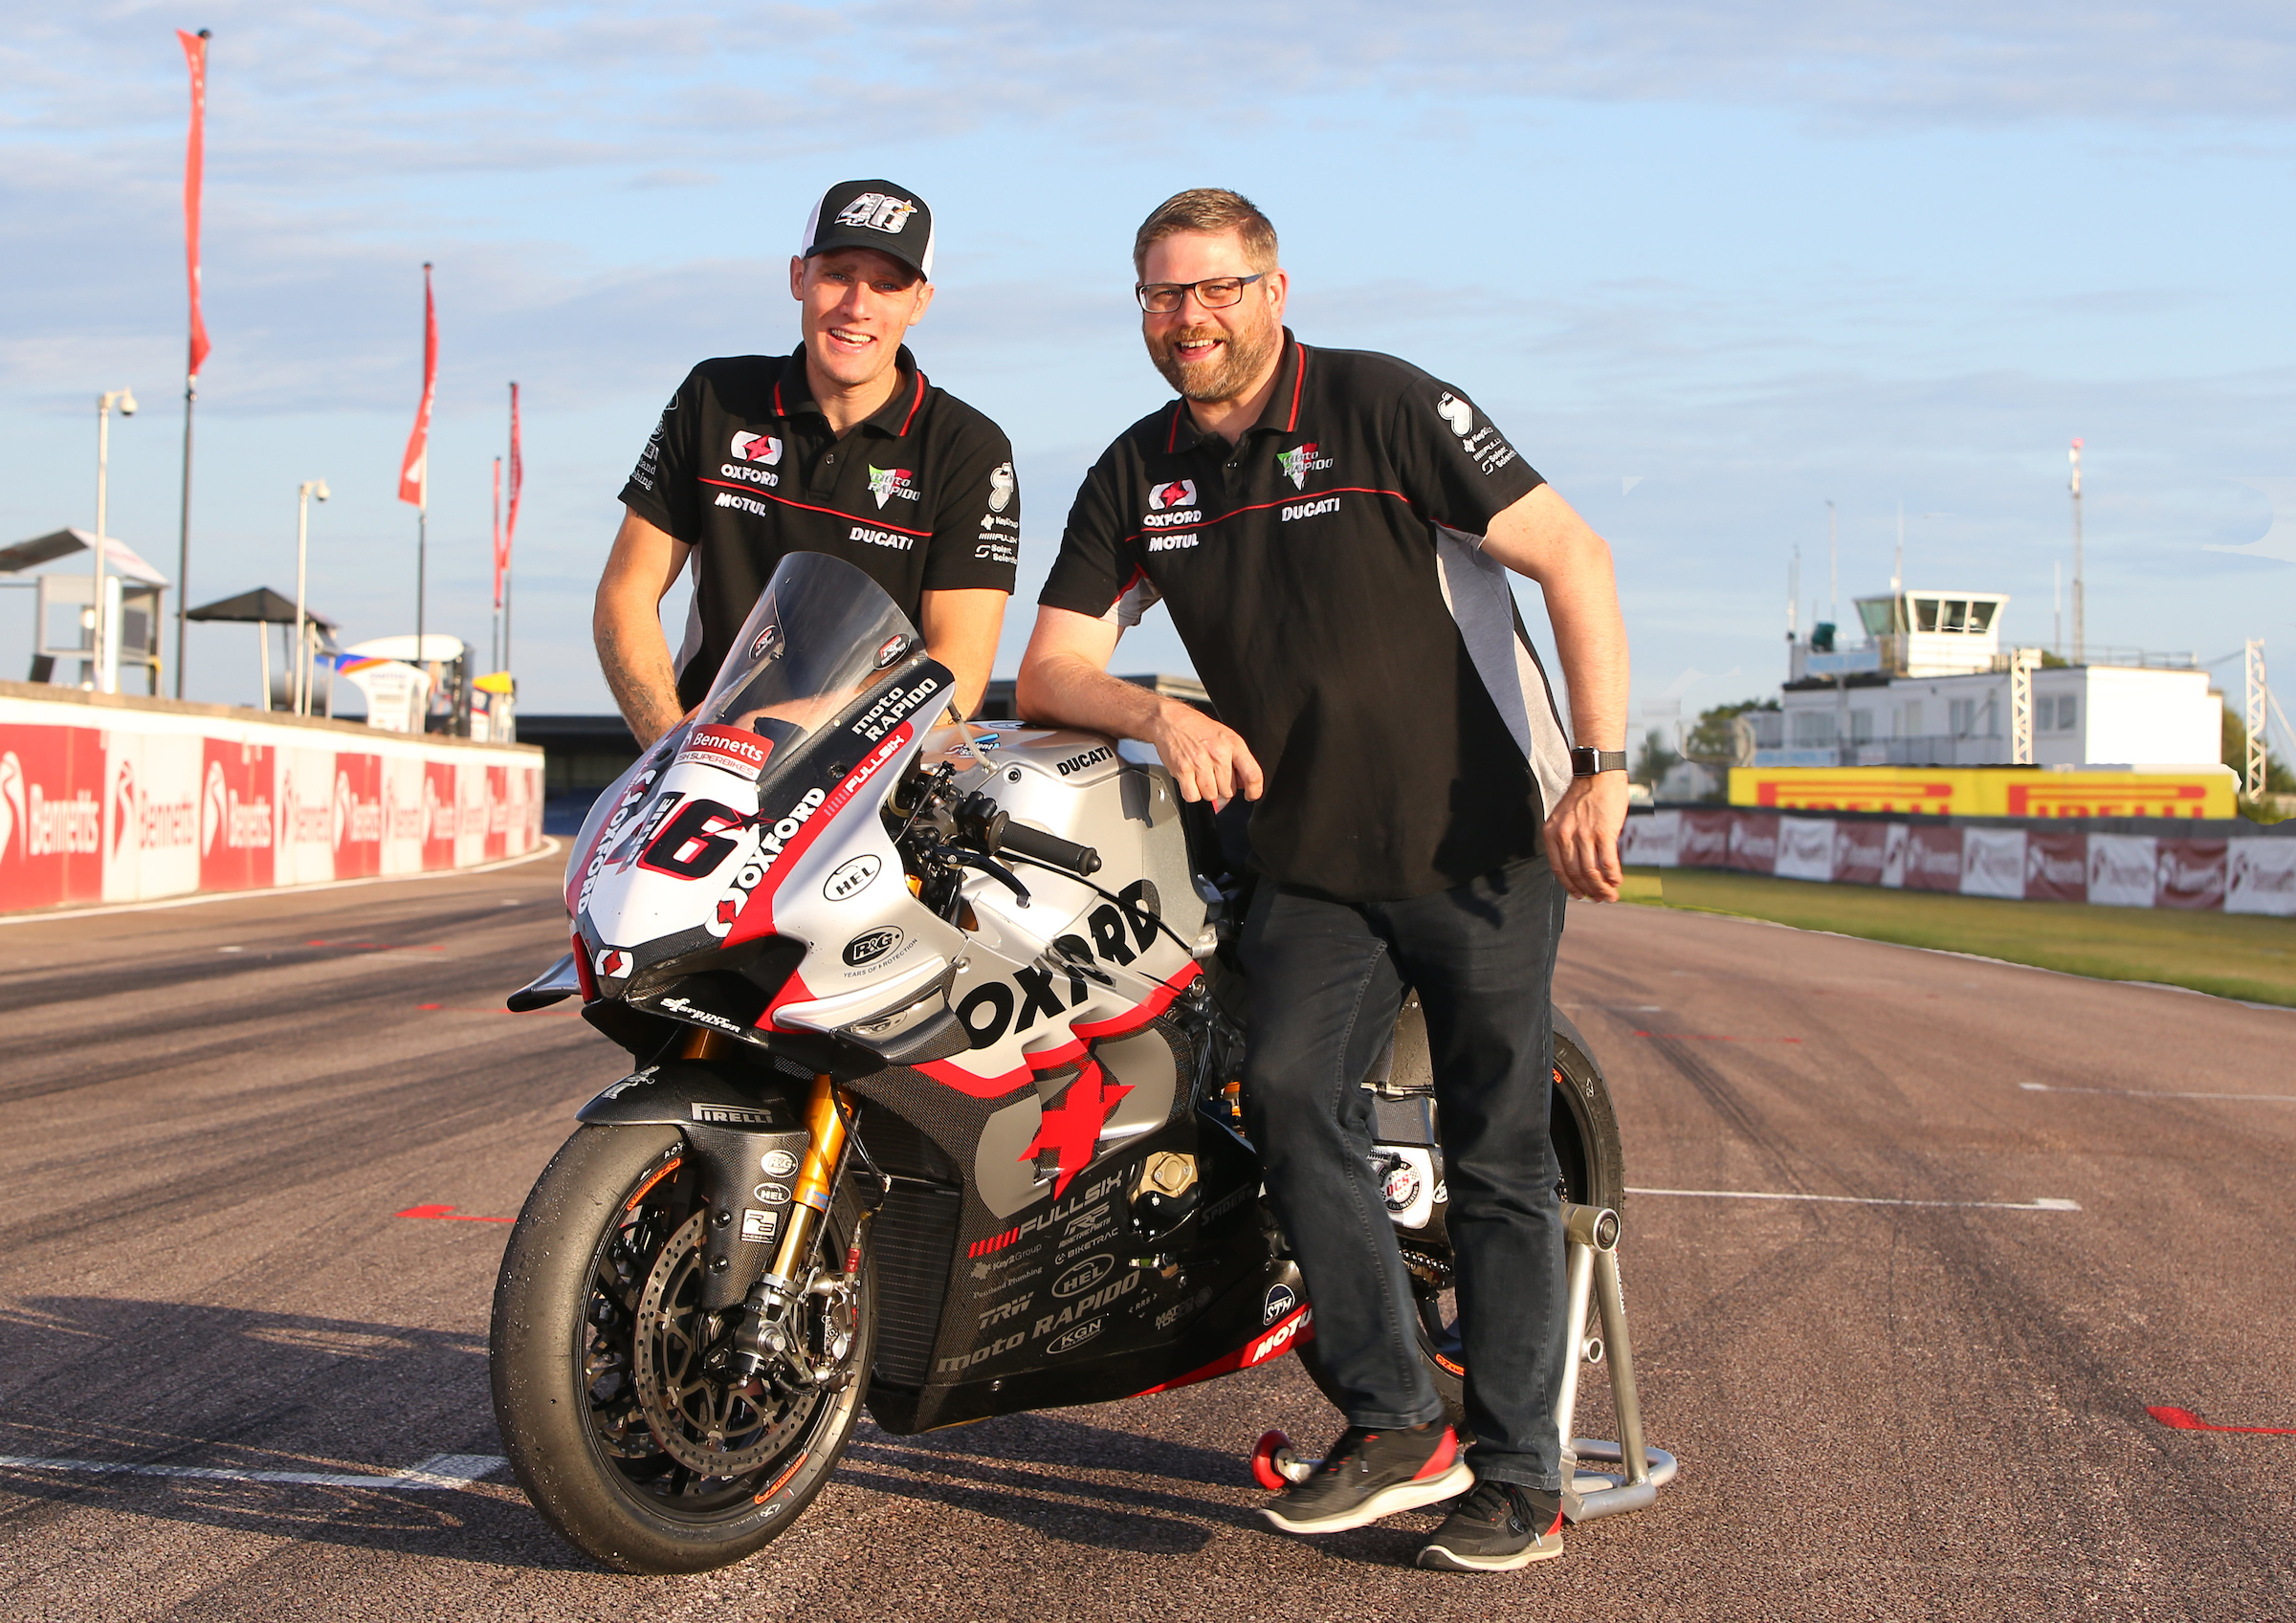 Itaca Nota Íncubo Tommy Bridewell becomes first rider to announce 2020 plans with Oxford  Racing Ducati — Oxford Products Racing Ducati